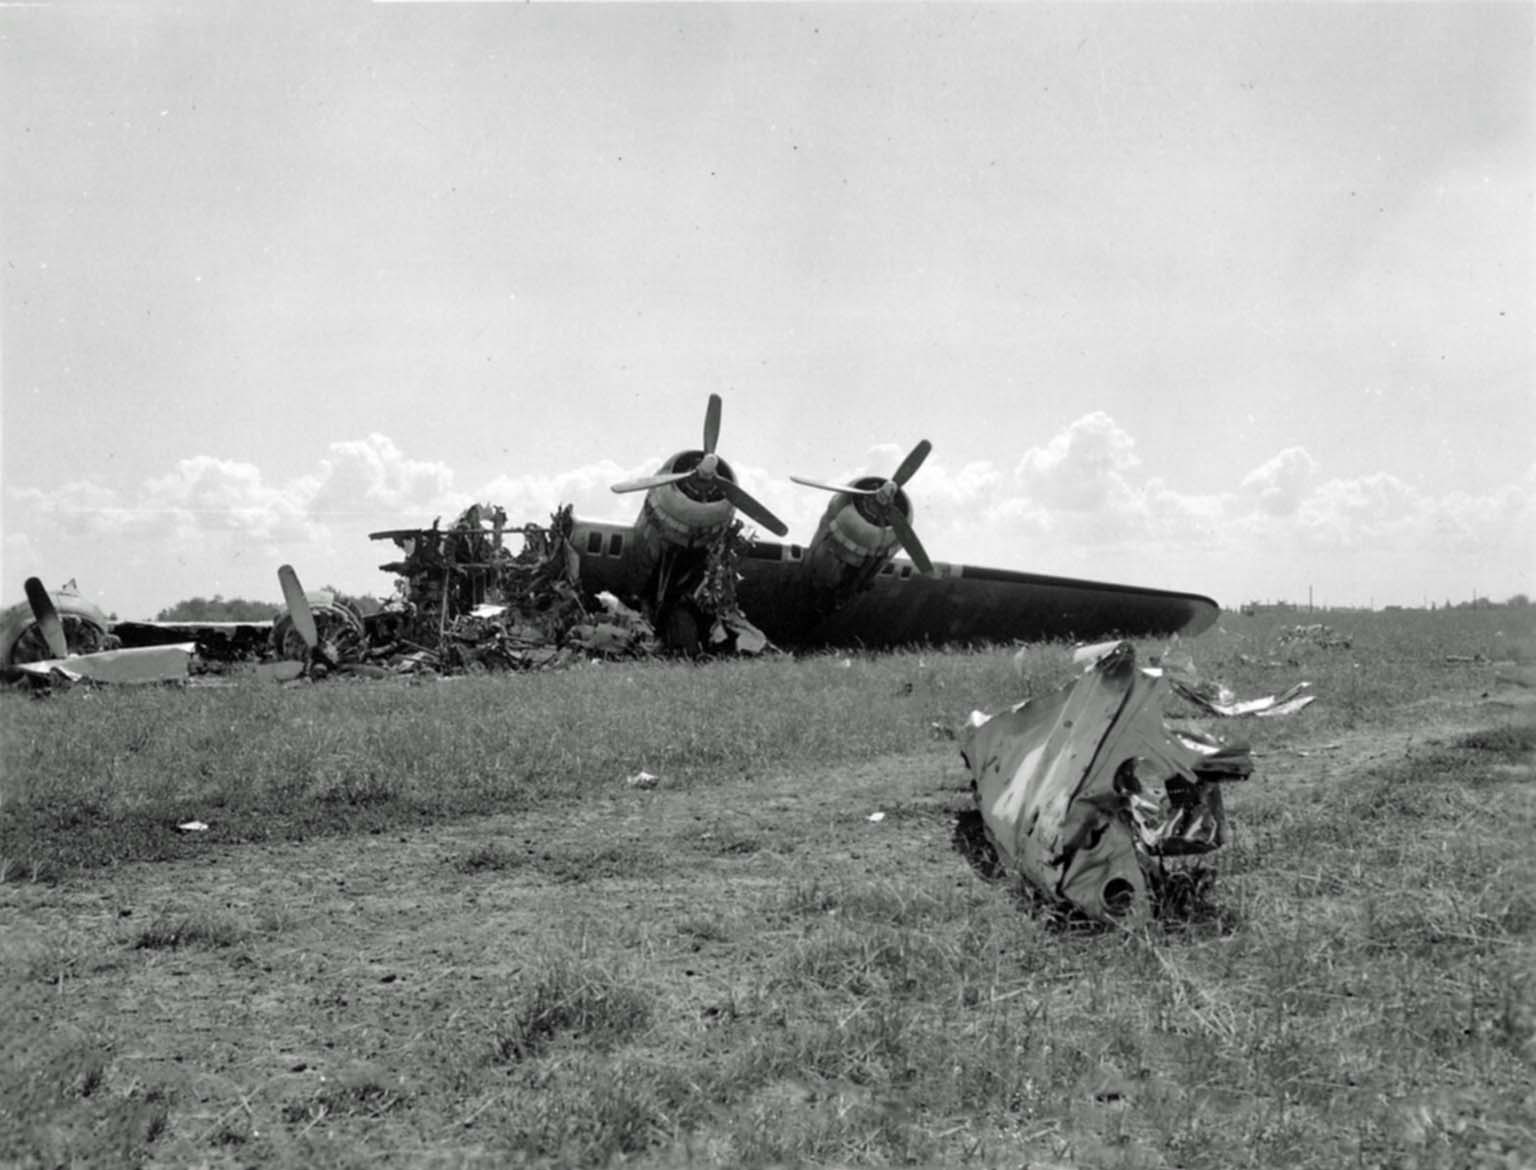 Fragments of the B-17